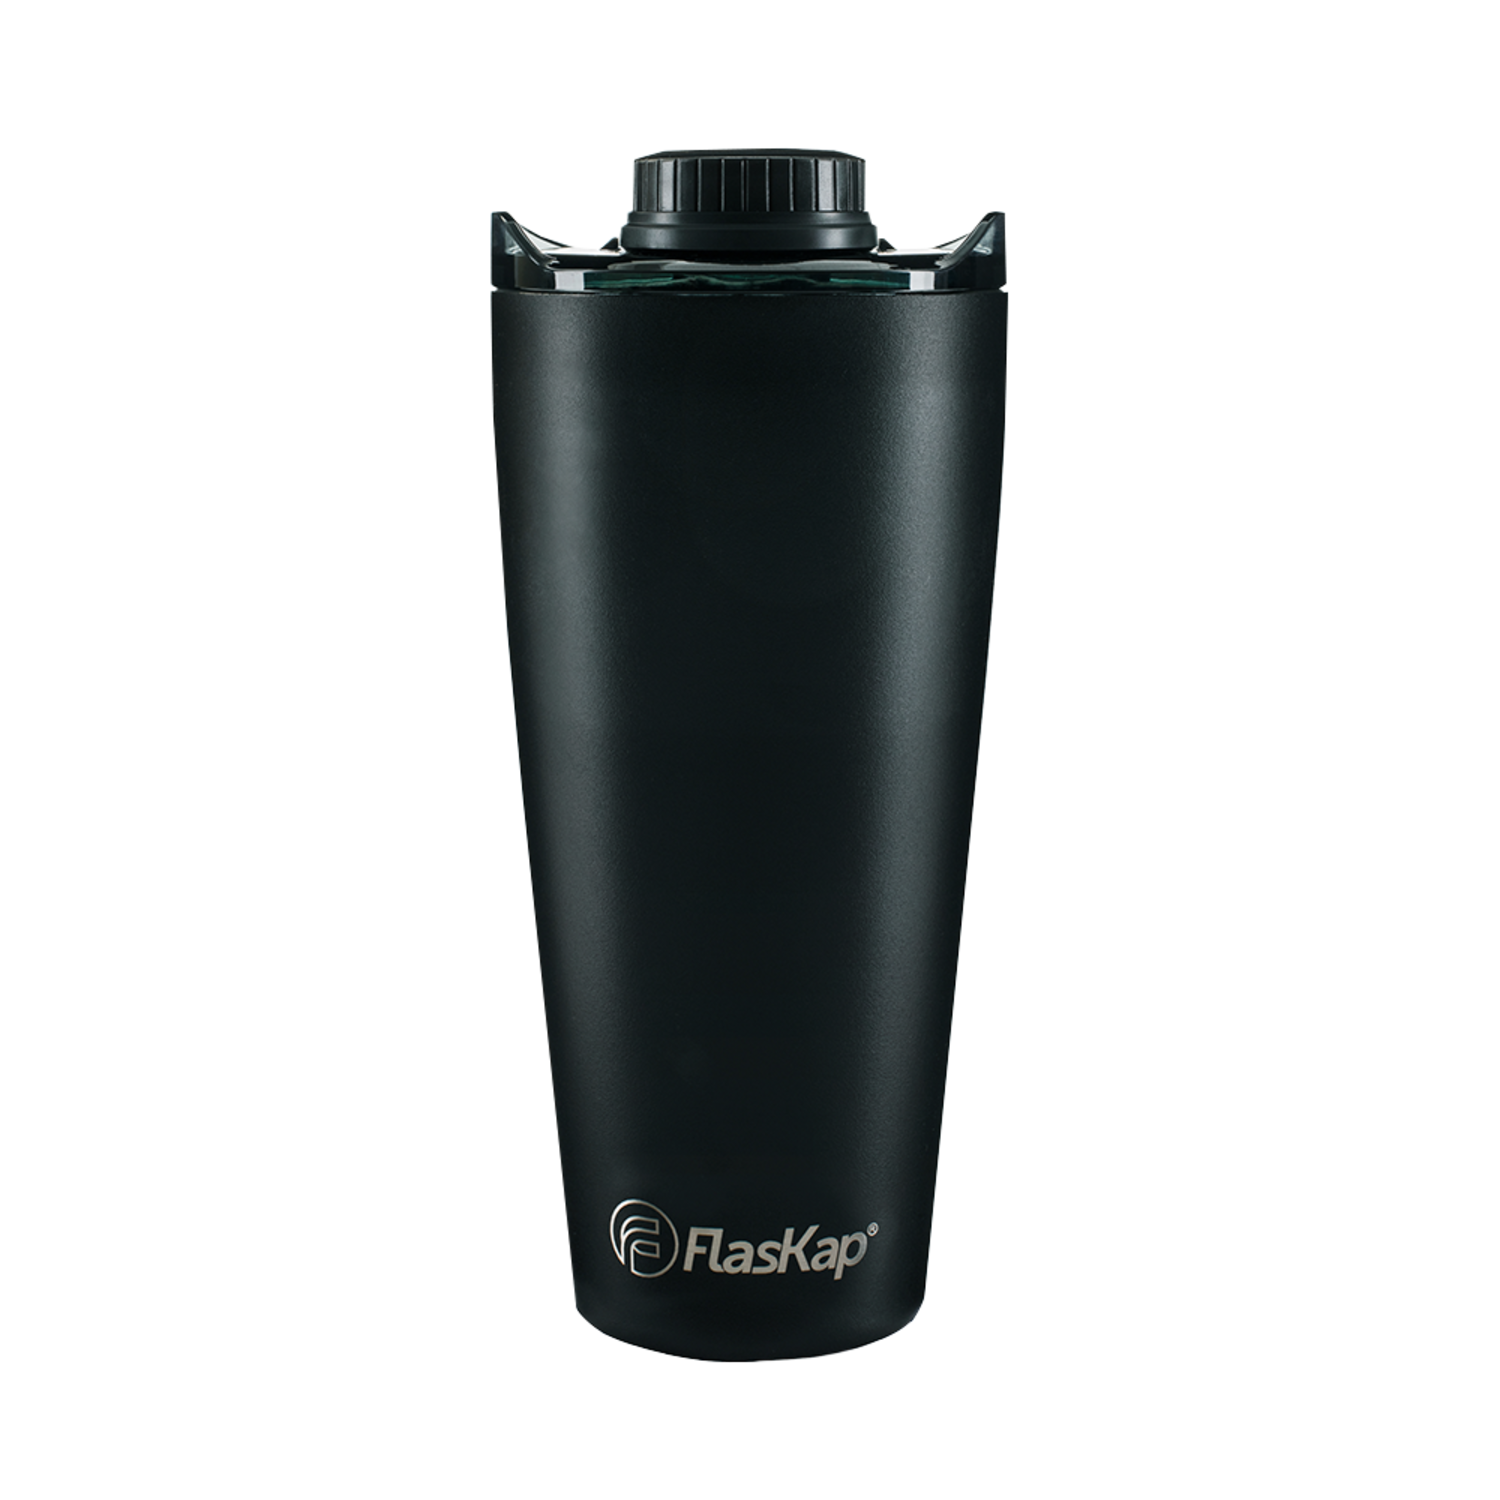 FlasKap Volst 30 Insulated Tumbler with Standard Lid, Keeps Drinks Warm or  Cold, Cup Holder Friendly, Splash Resistant Cup for Travel